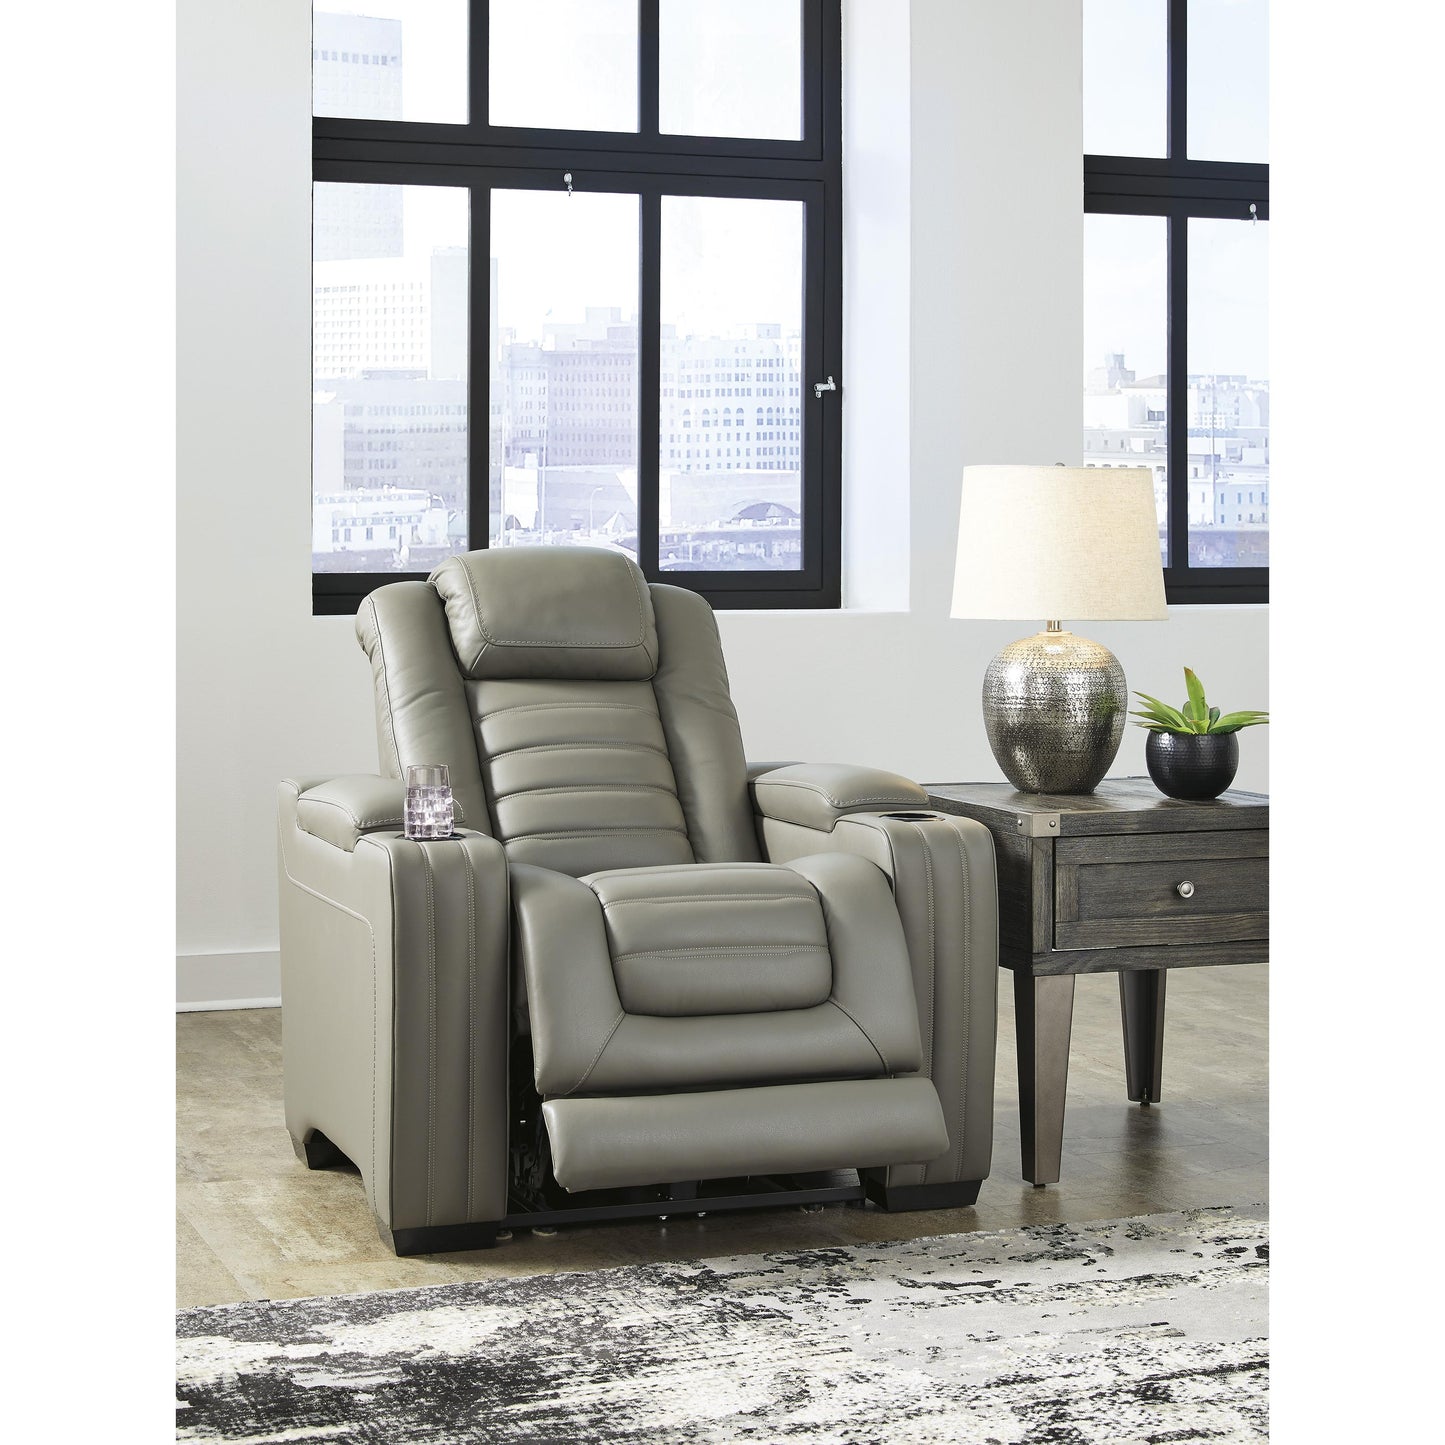 Signature Design by Ashley Backtrack Power Leather Match Recliner U2800513 IMAGE 7